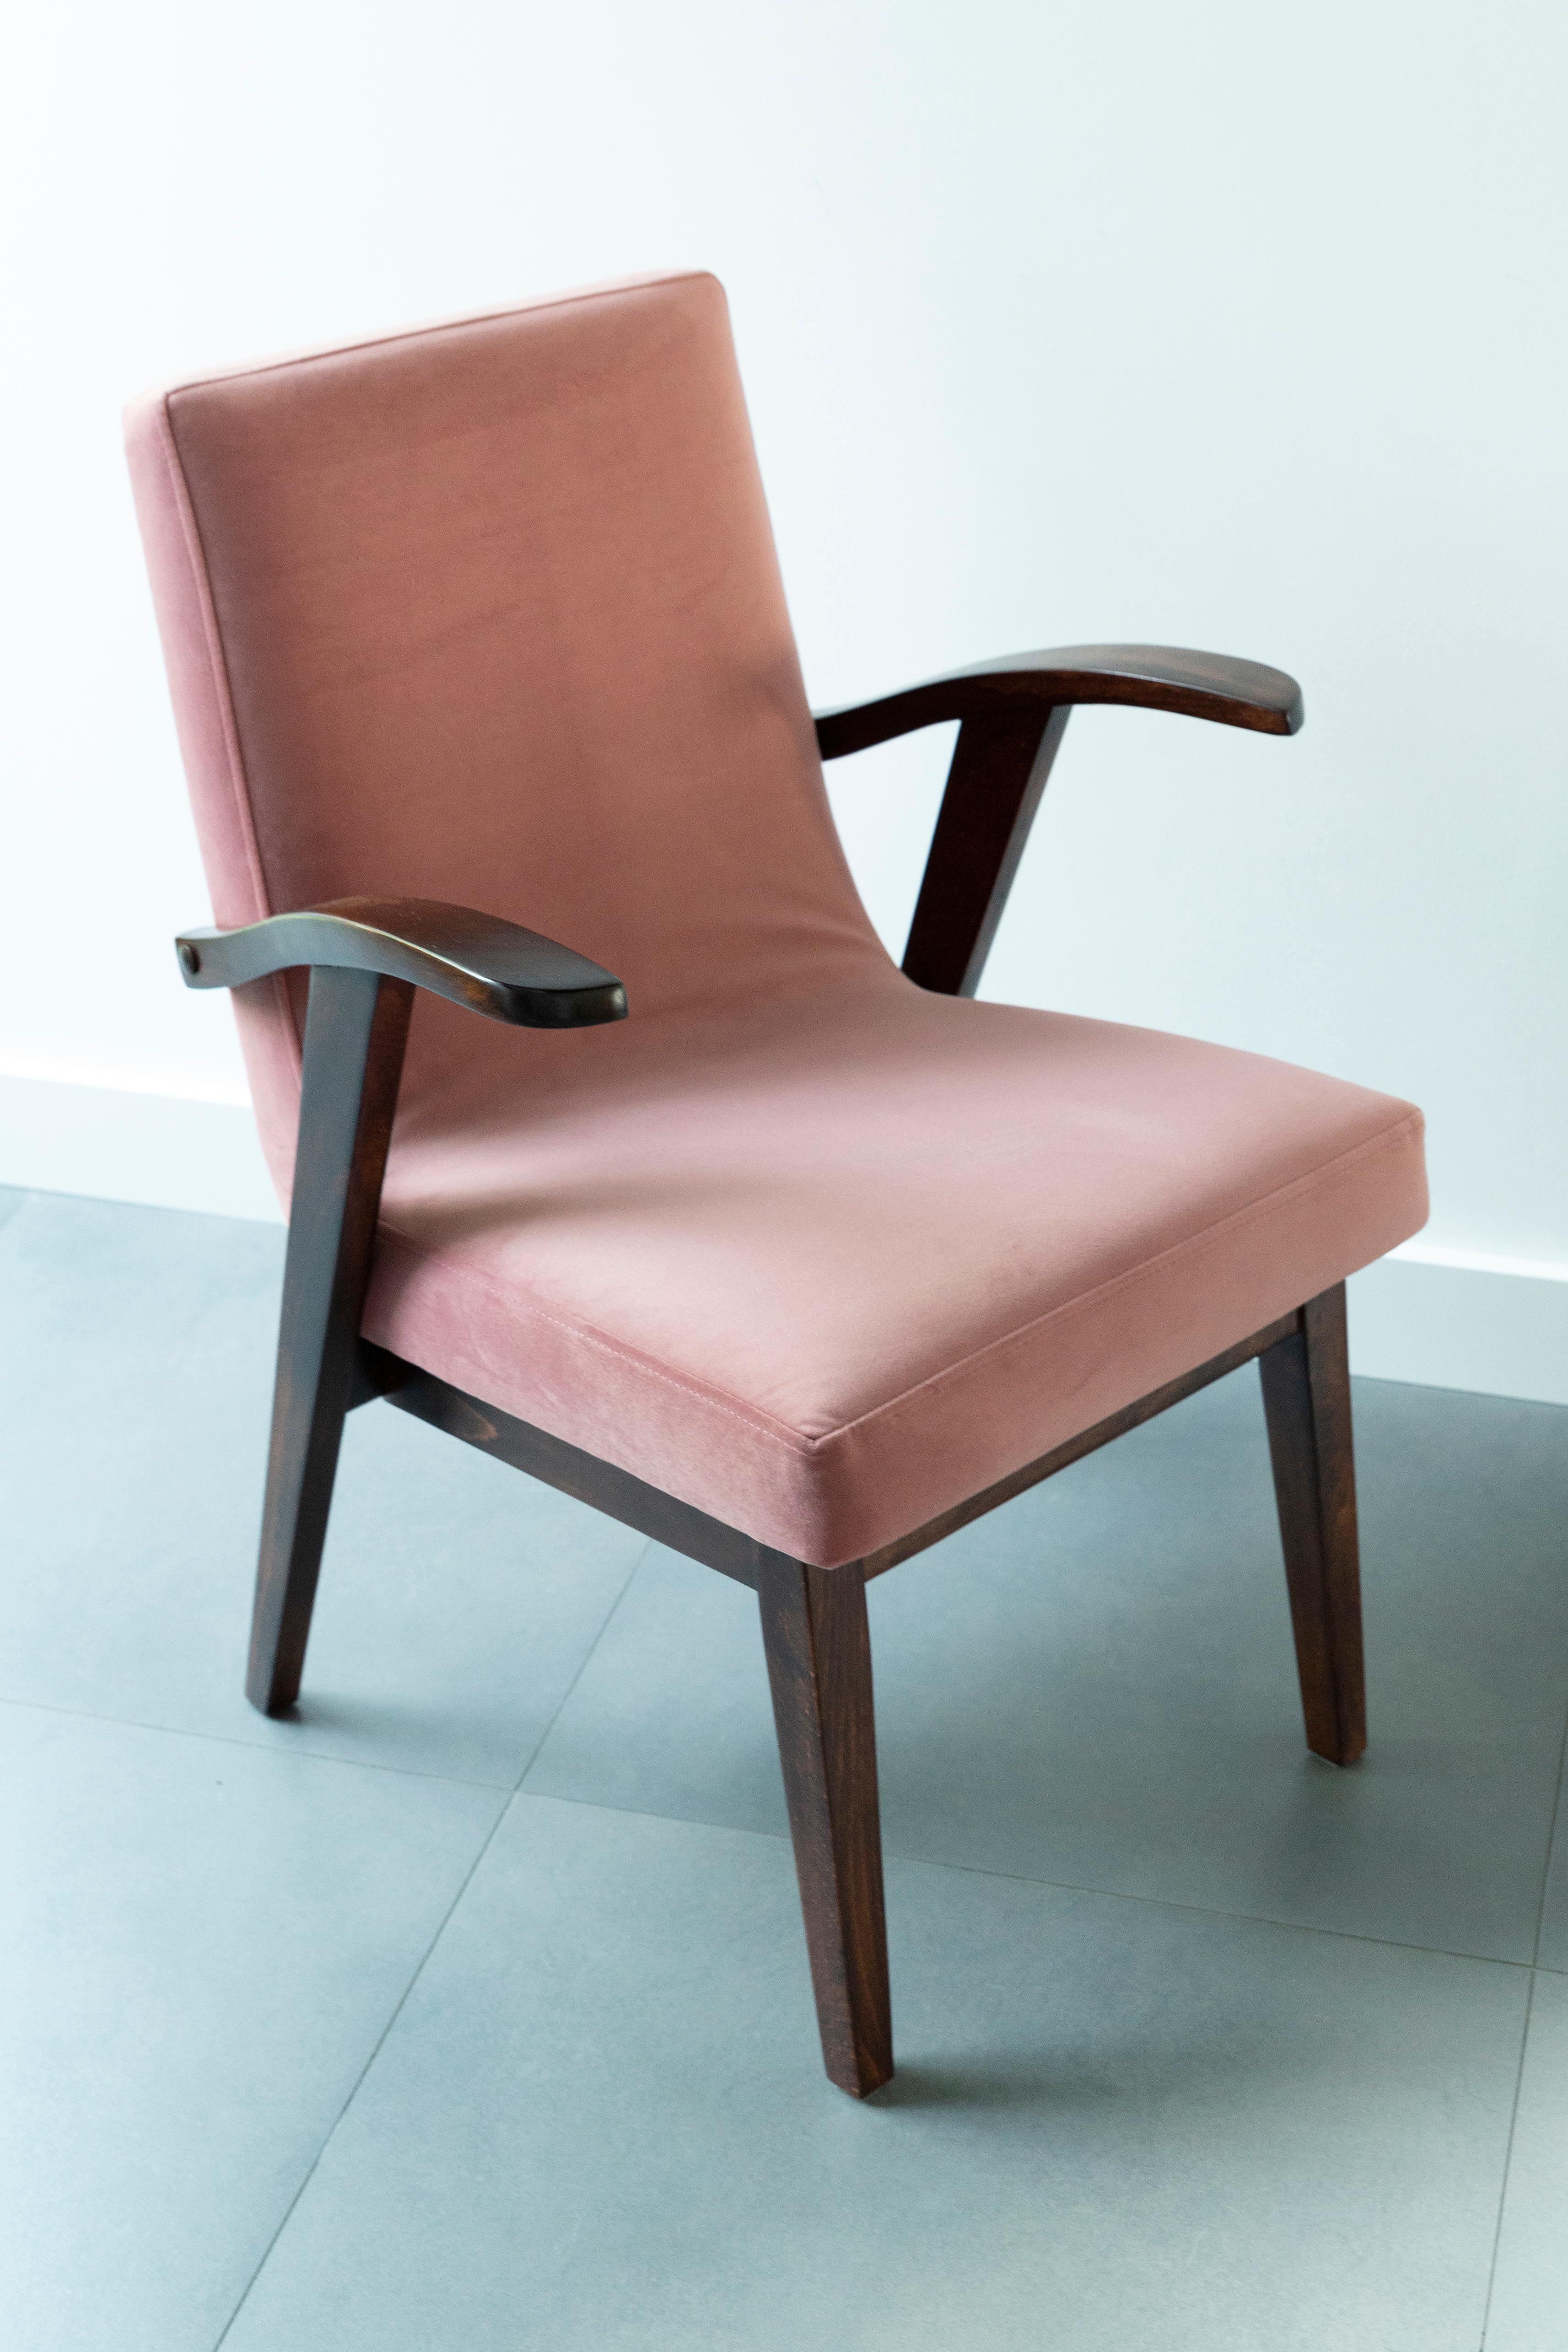 Twelve 20th Century Armchairs in Dusty Pink Velvet by Mieczyslaw Puchala, 1960s For Sale 1